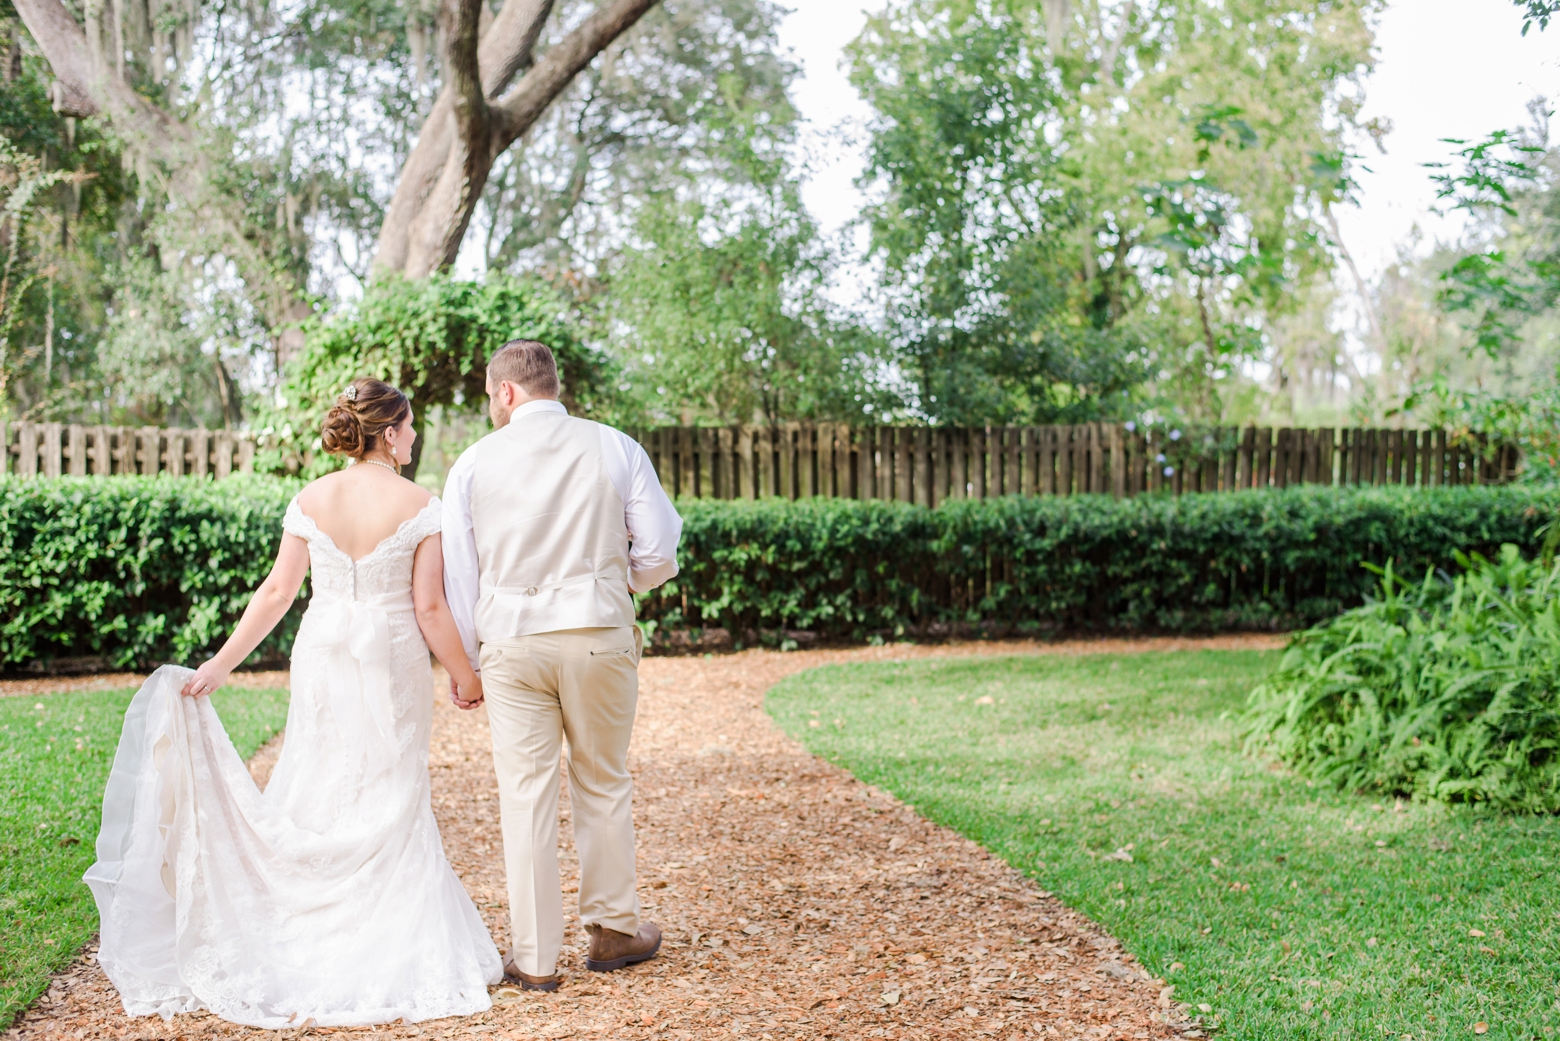 Bride and Groom walking together to their cross creek wedding ceremony